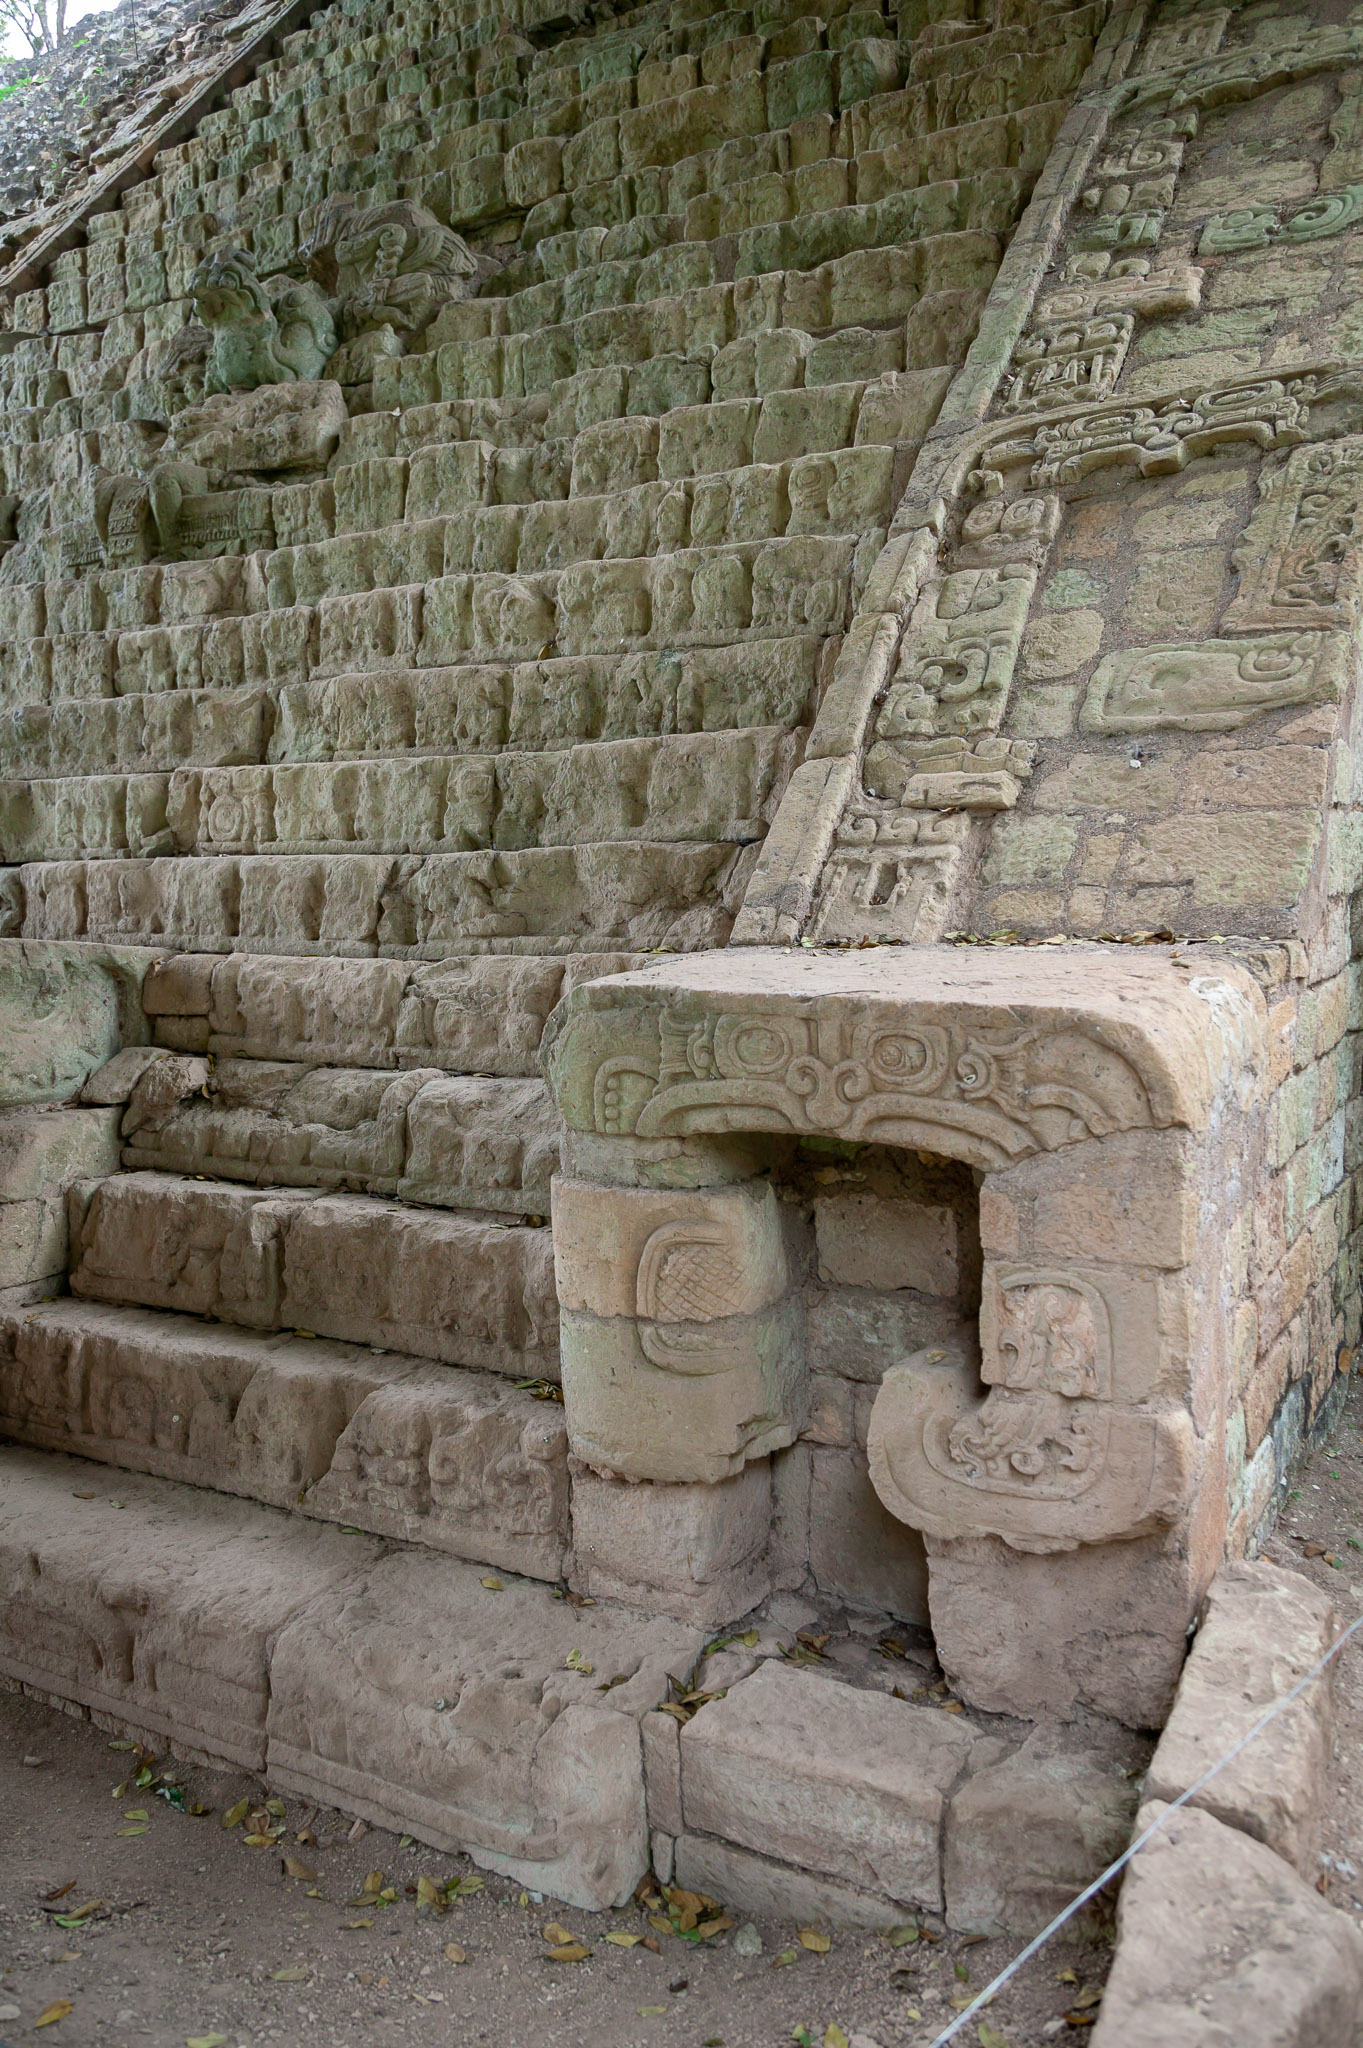 Exterior staircase with calendar carved into stairs